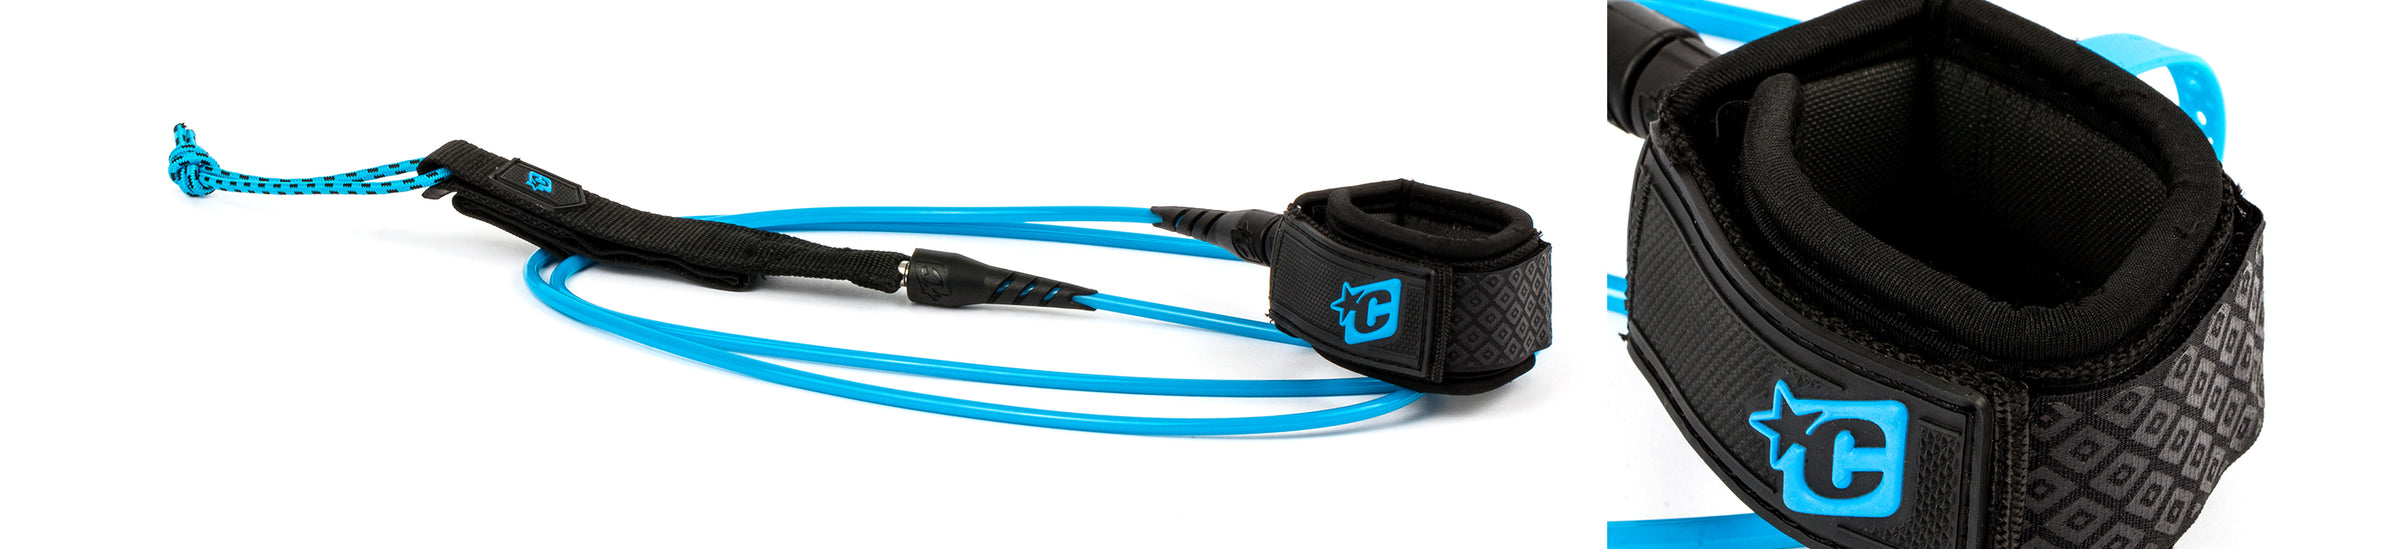 Comp Surfboard Leashes